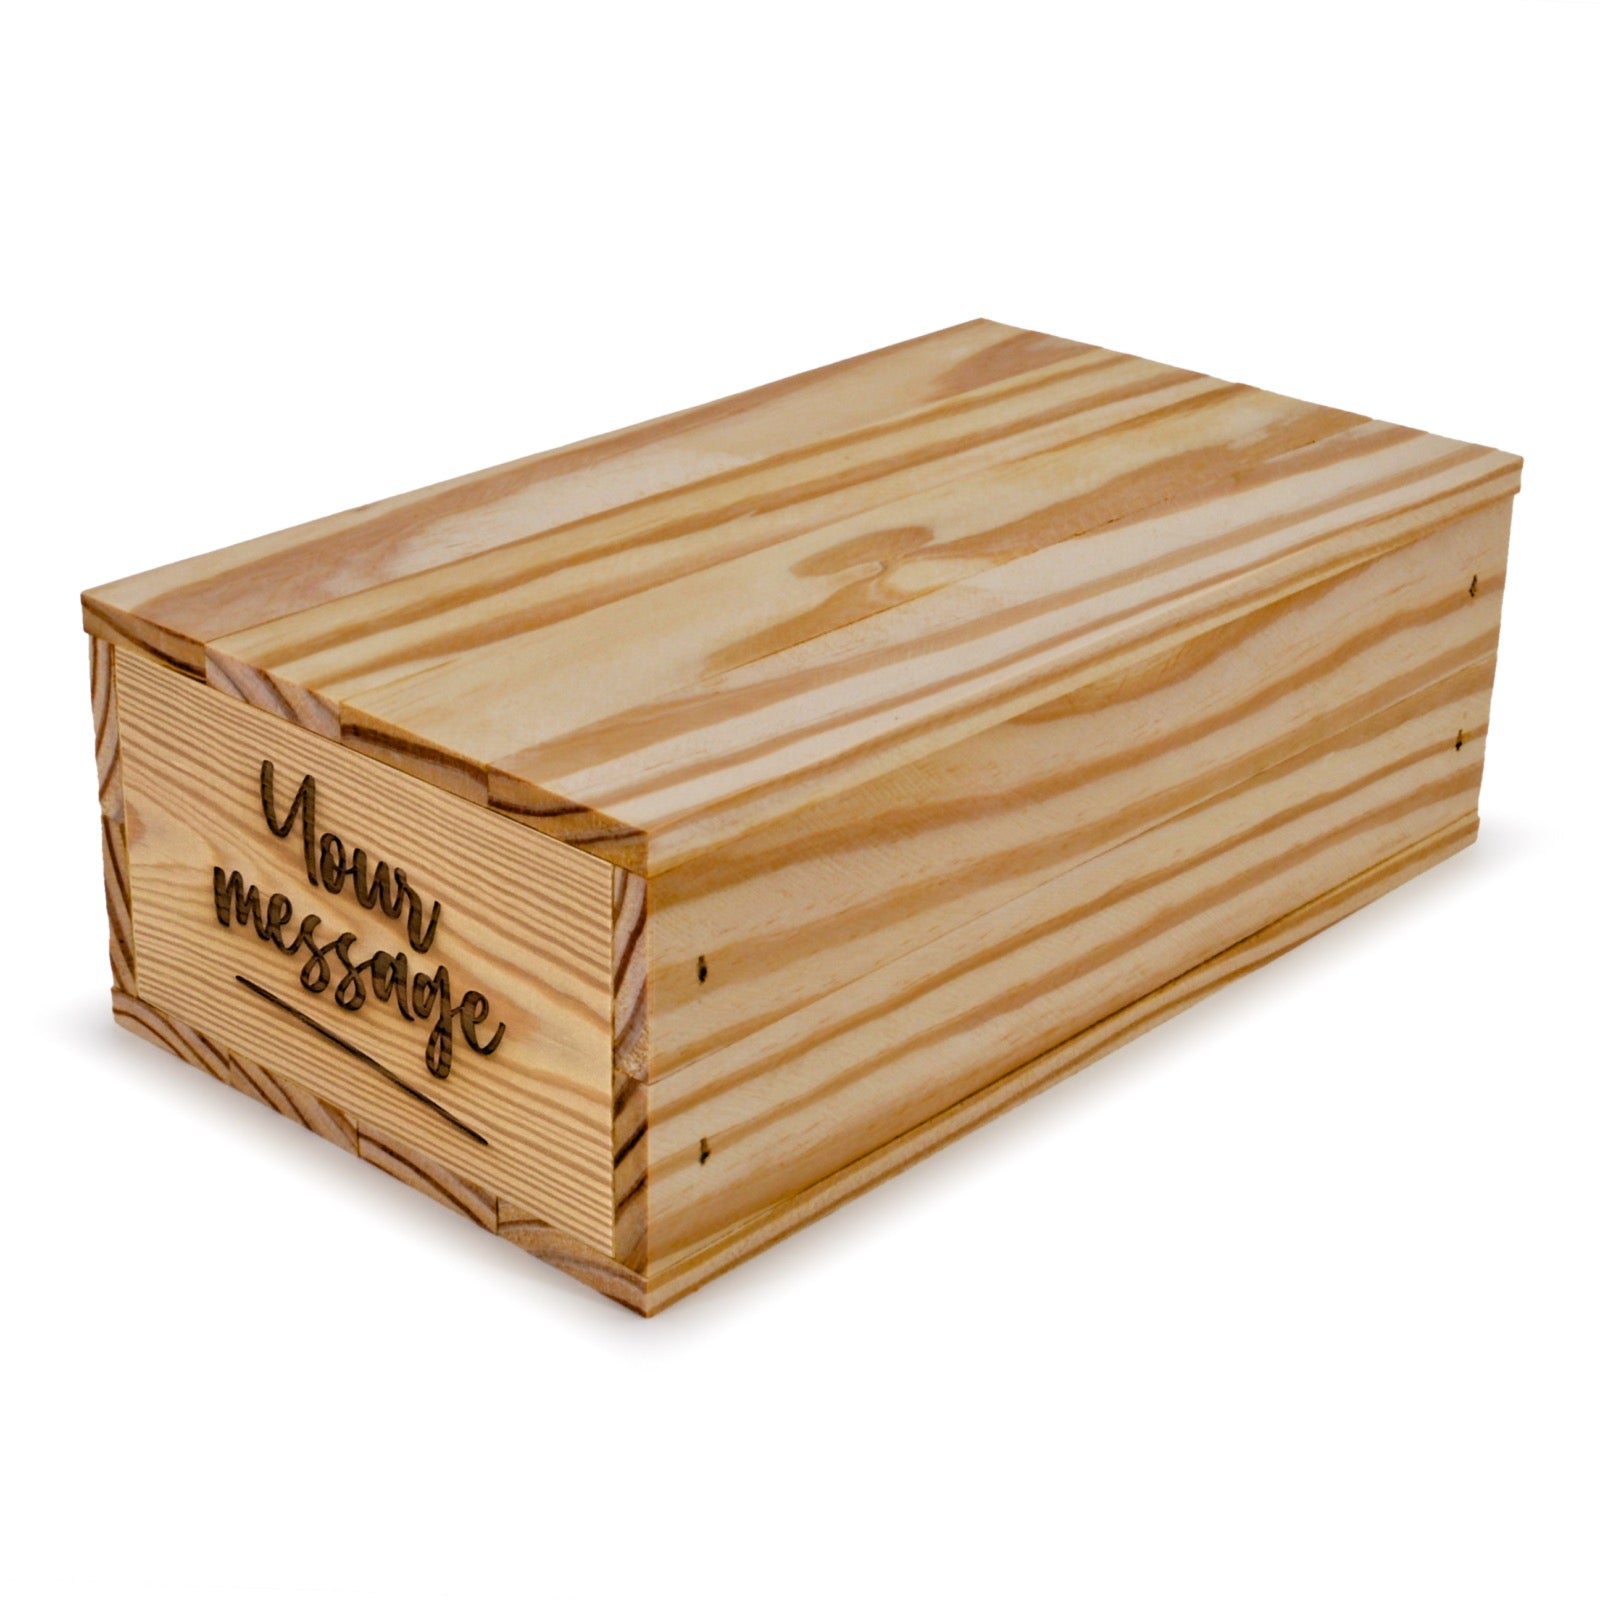 Small wooden crate with lid and custom message 11x6.25x3.5, 6-BX-11-6.25-3.5-ST-NW-LL, 12-BX-11-6.25-3.5-ST-NW-LL, 24-BX-11-6.25-3.5-ST-NW-LL, 48-BX-11-6.25-3.5-ST-NW-LL, 96-BX-11-6.25-3.5-ST-NW-LL